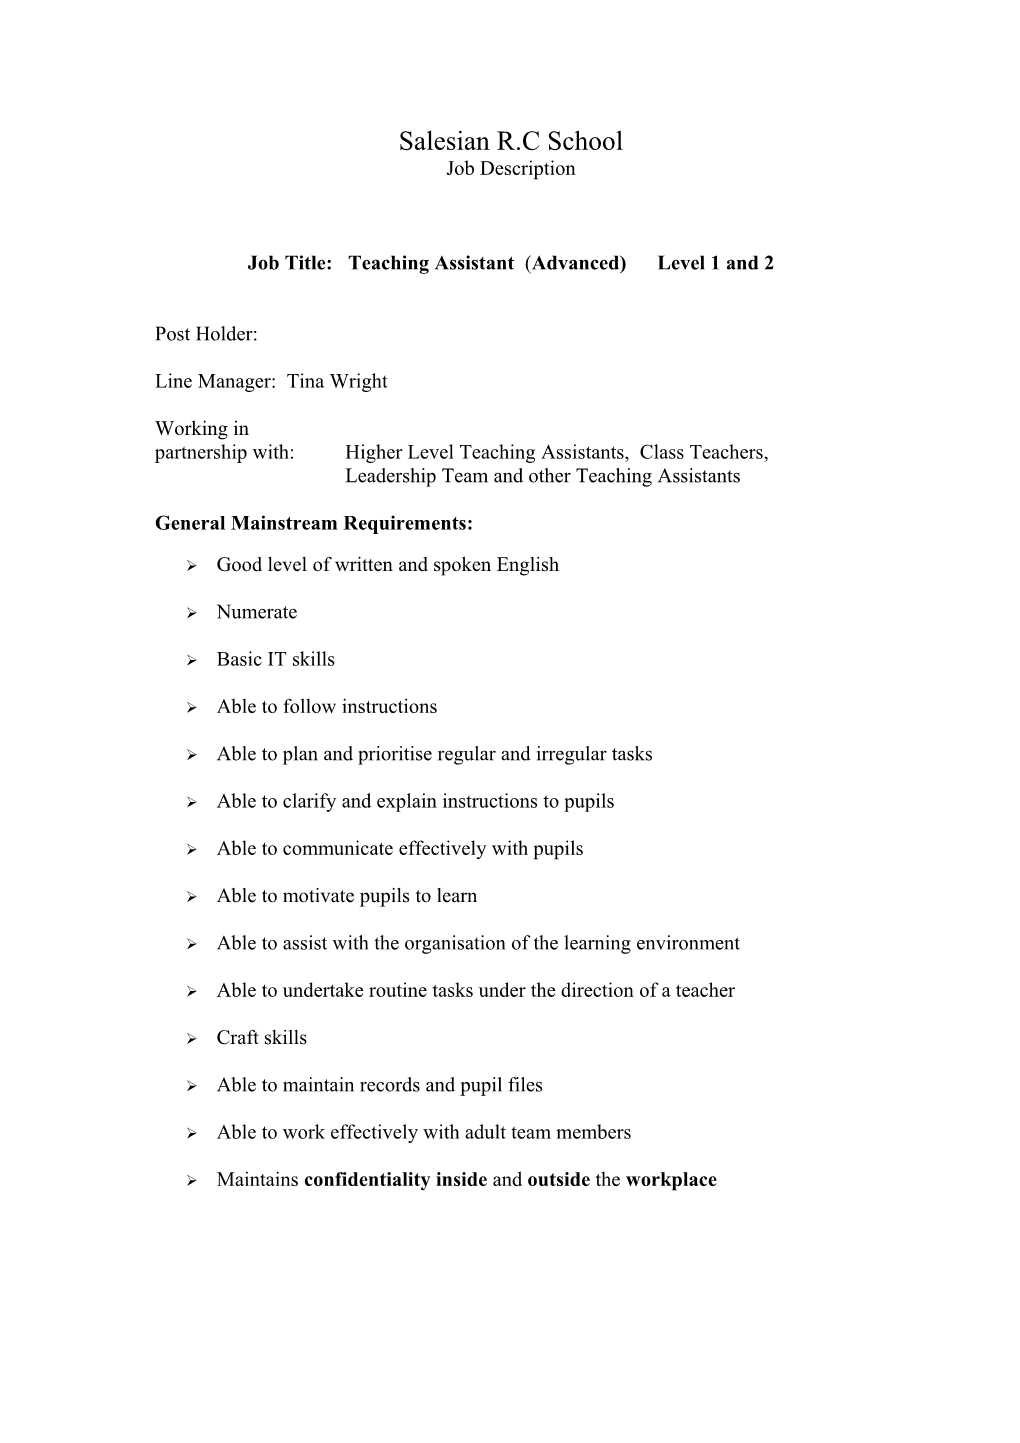 Job Title: Teaching Assistant (Advanced) Level 1 and 2